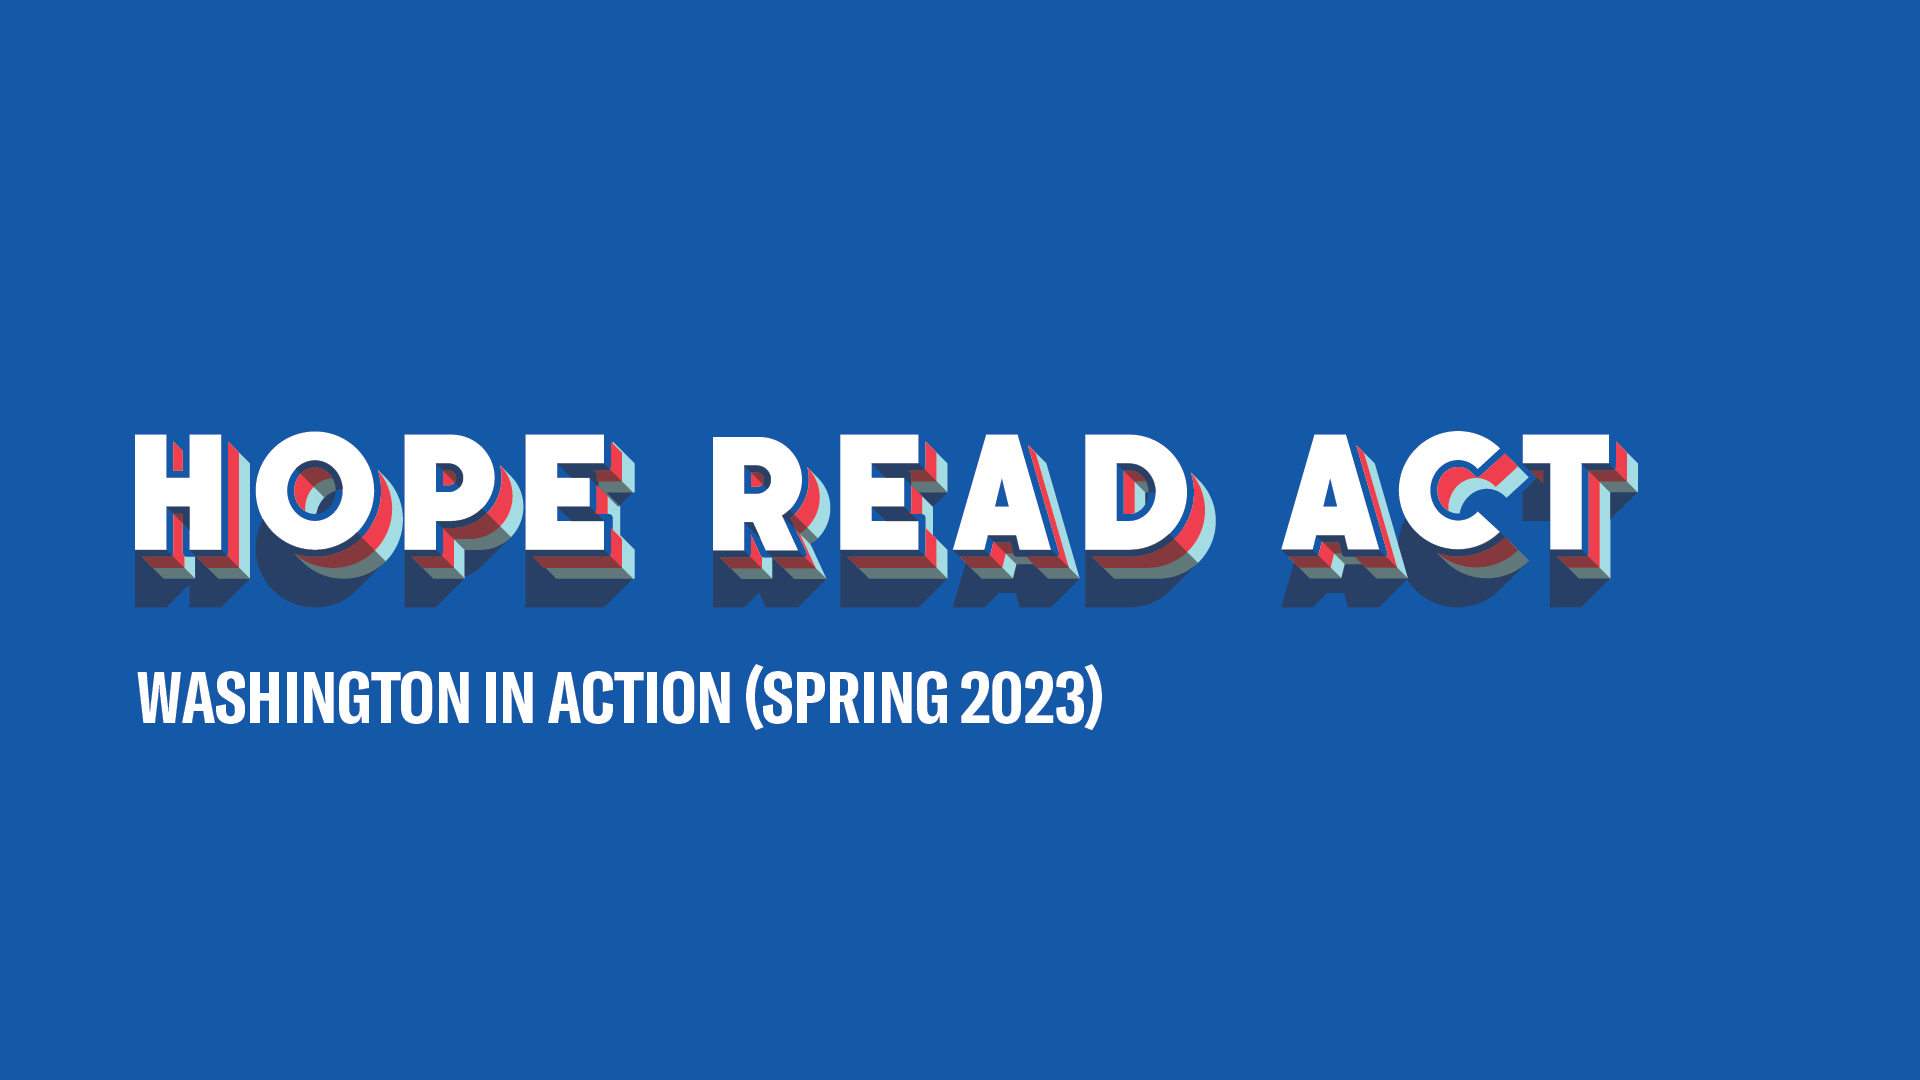 Hope Read Act Washington in Action (Spring 2023)